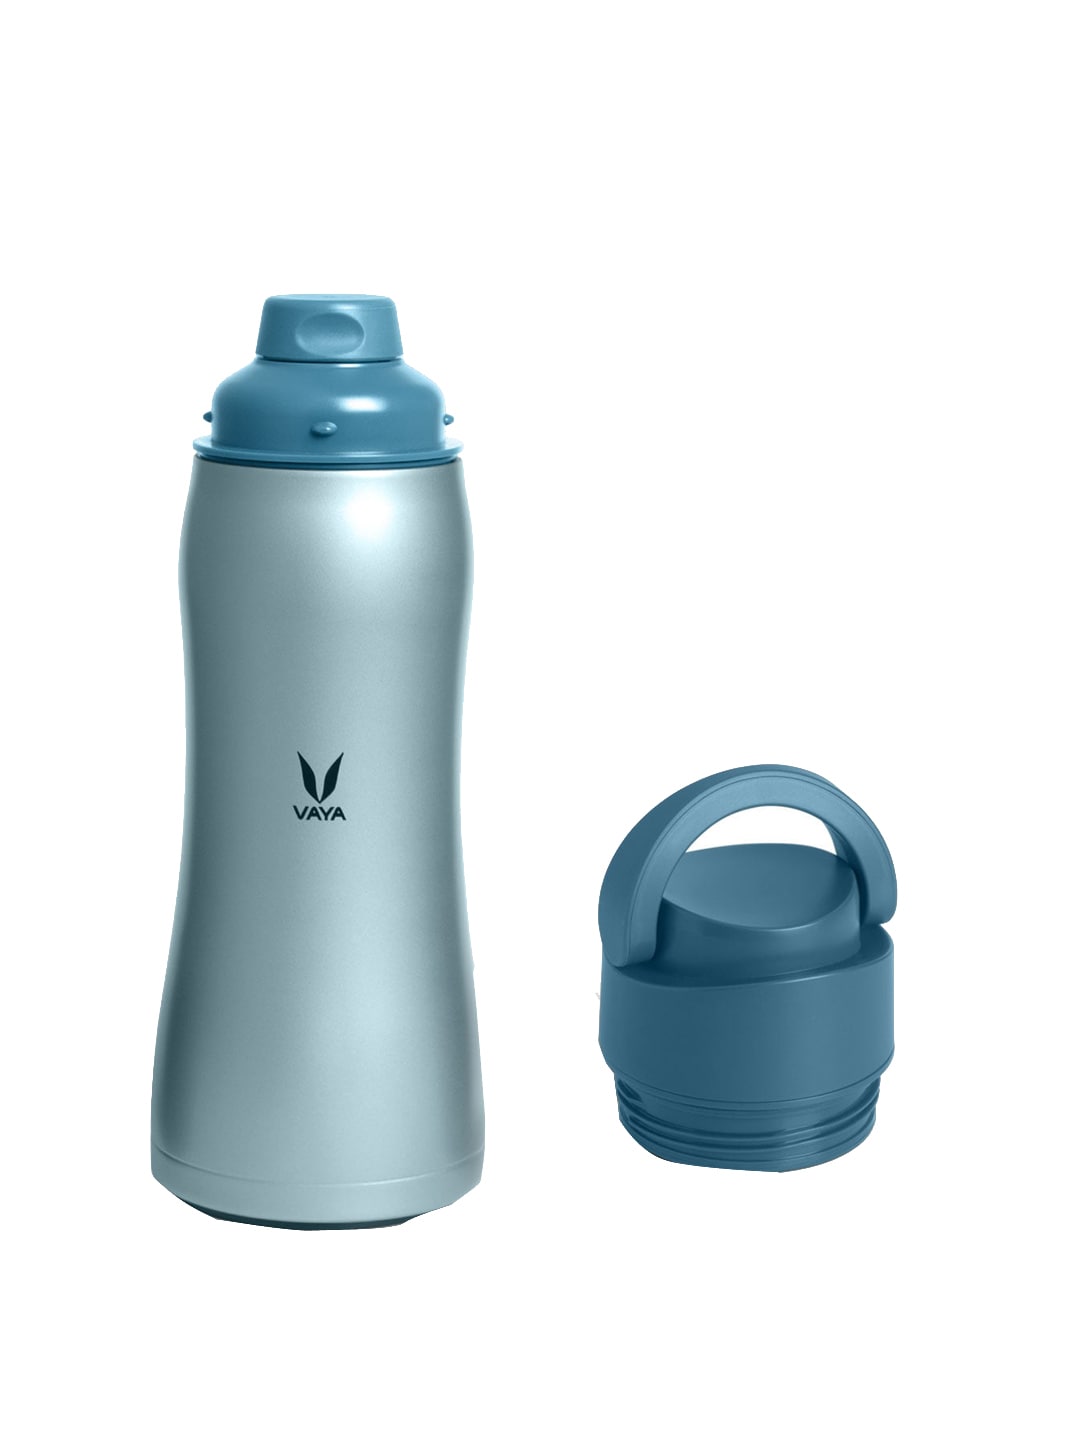 Vaya Blue Solid Stainless Steel Water Bottle Price in India